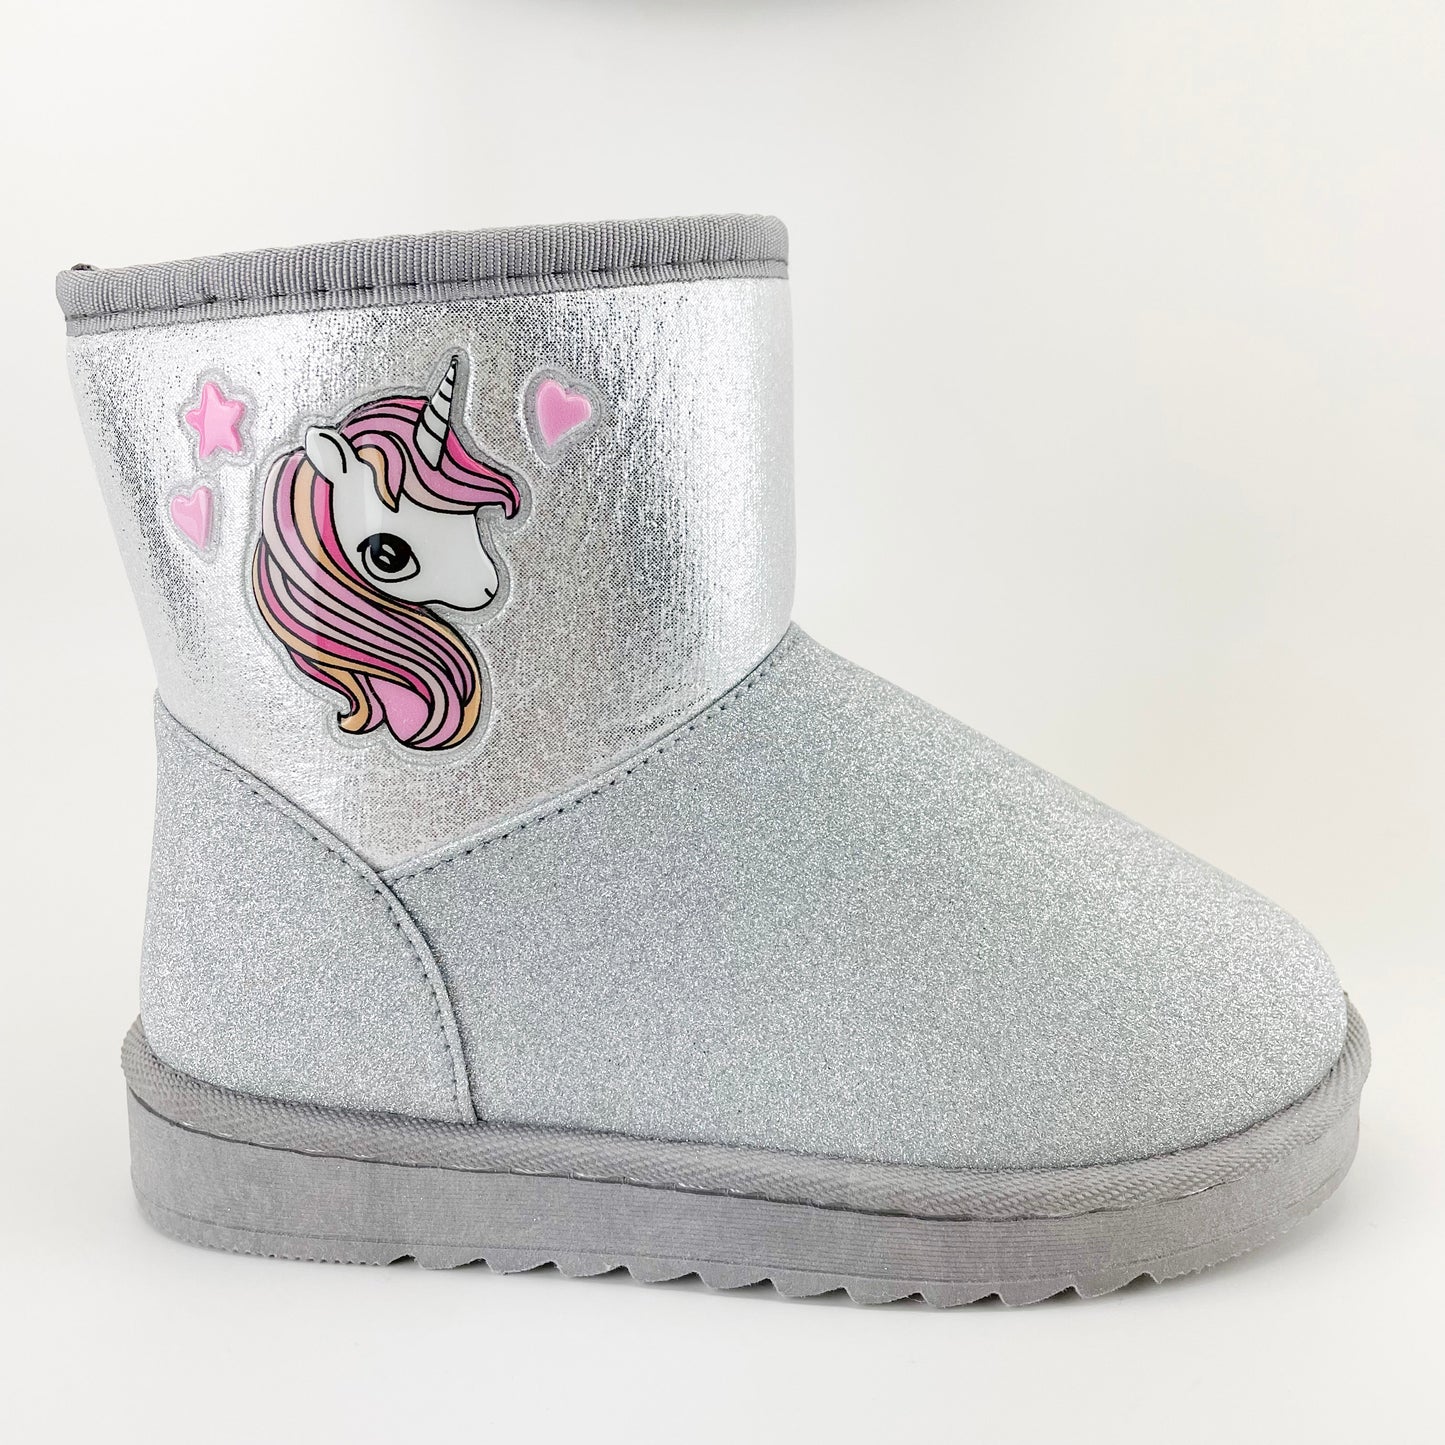 "Sparkly" Girl Glitter Boots